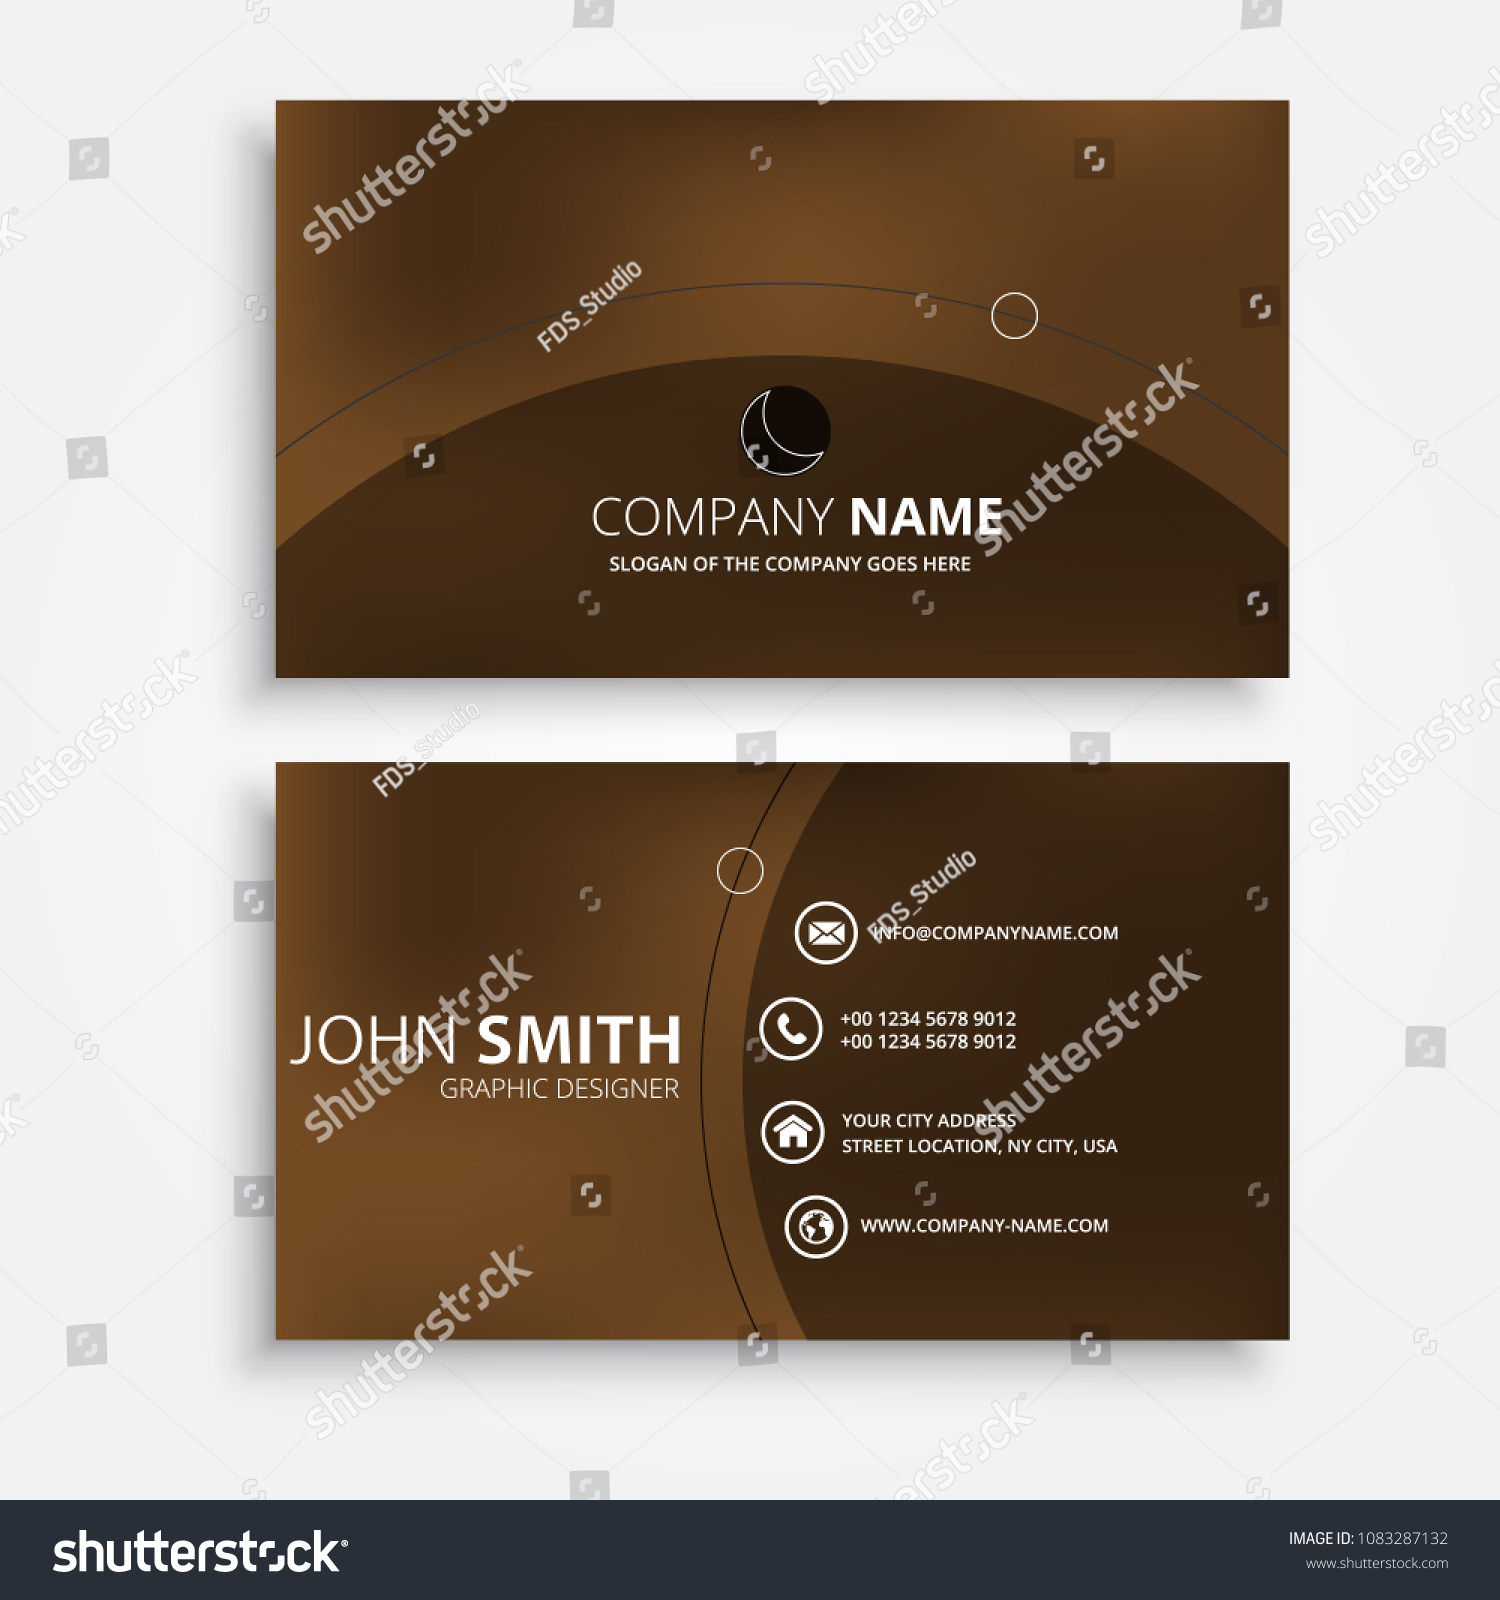 Information Card Template from image.shutterstock.com